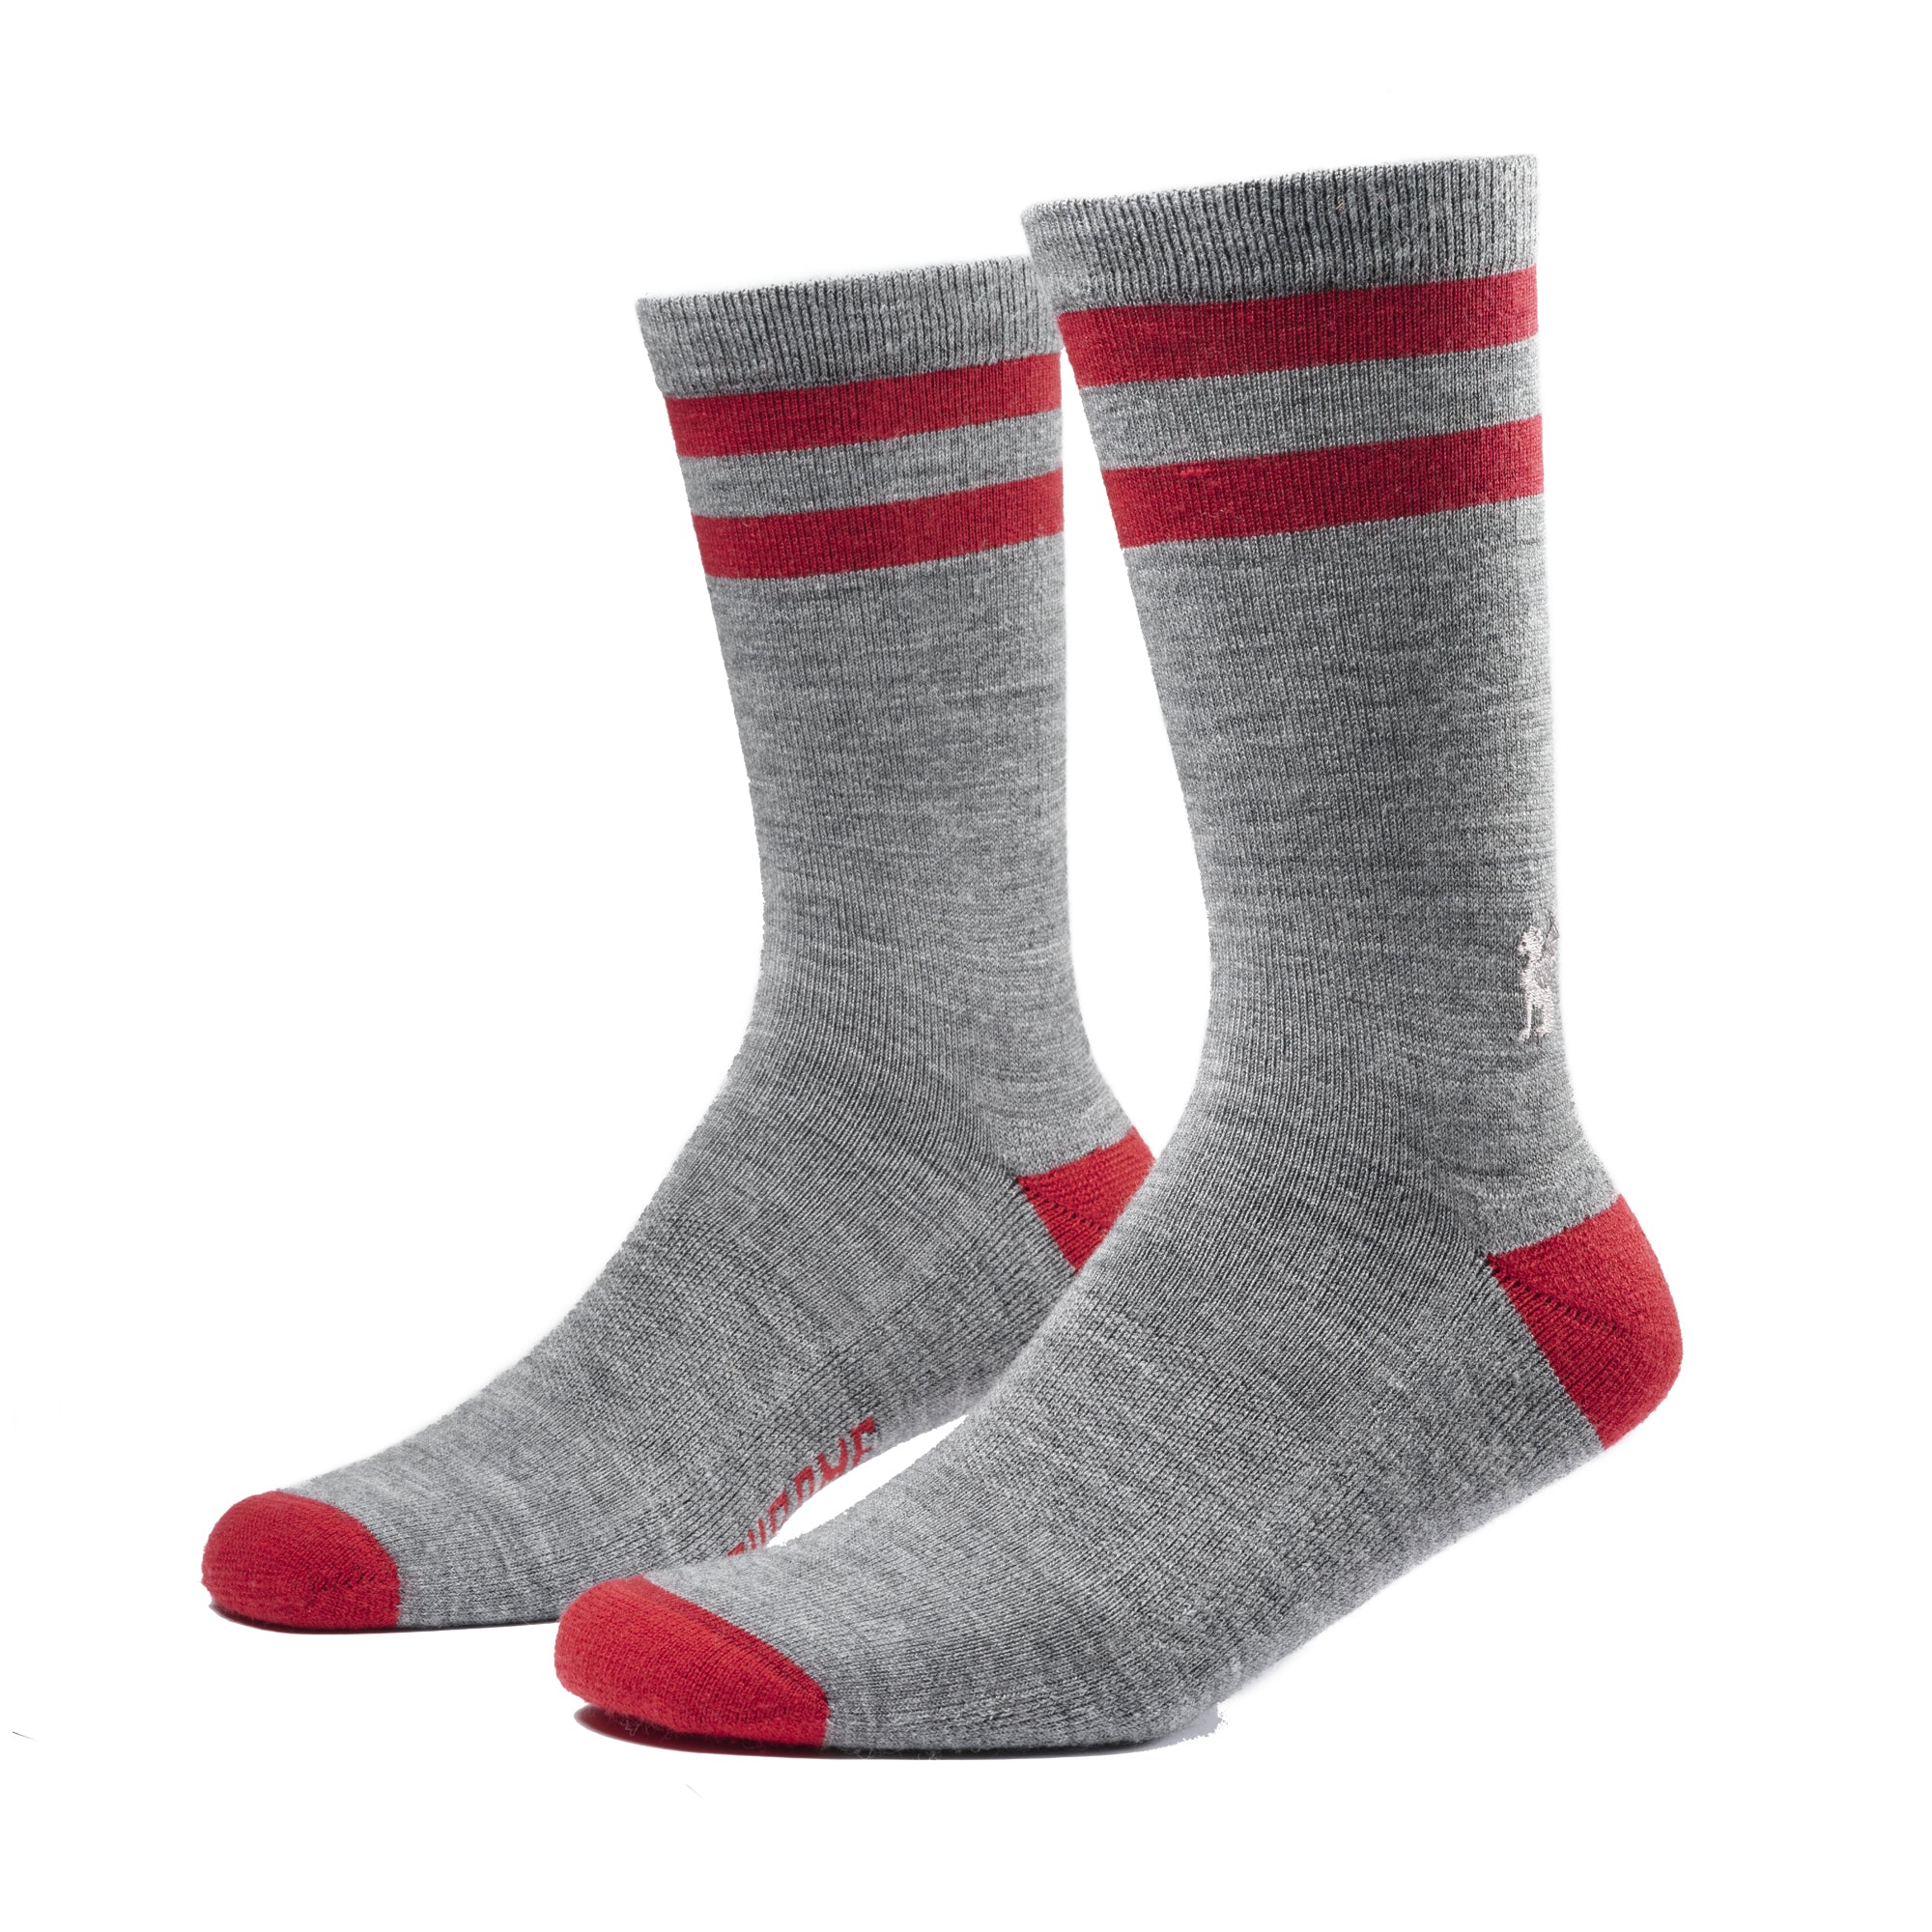 Merino Crew socks in grey and red stripes with logo #color_grey red stripe